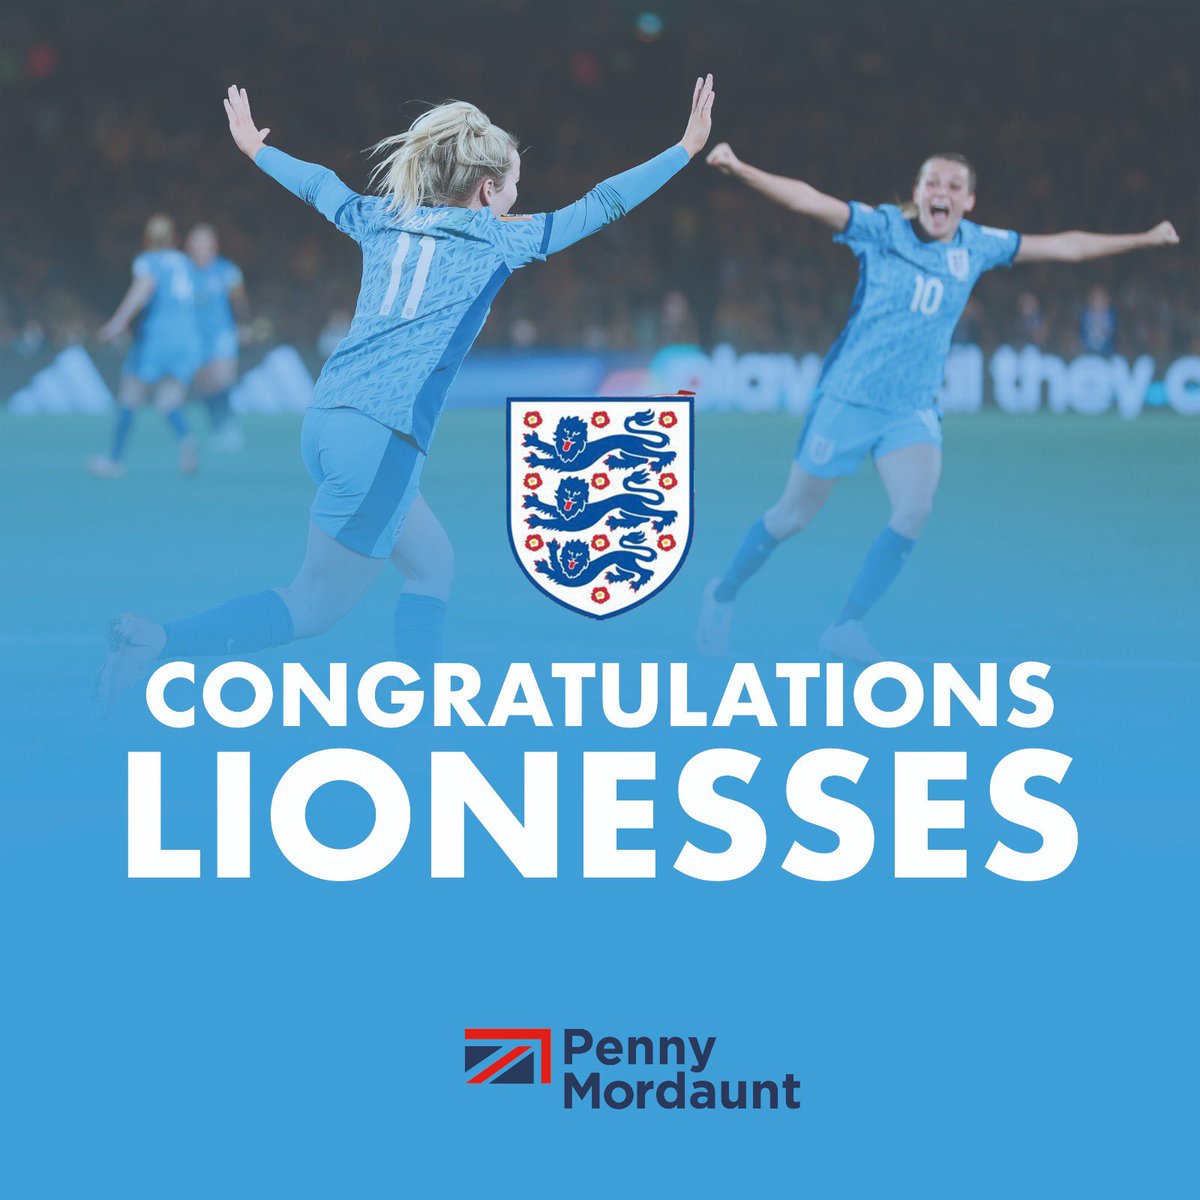 Congratulations @Lionesses You’re on your way to #FIFAWWC So proud of you all! ⚽️